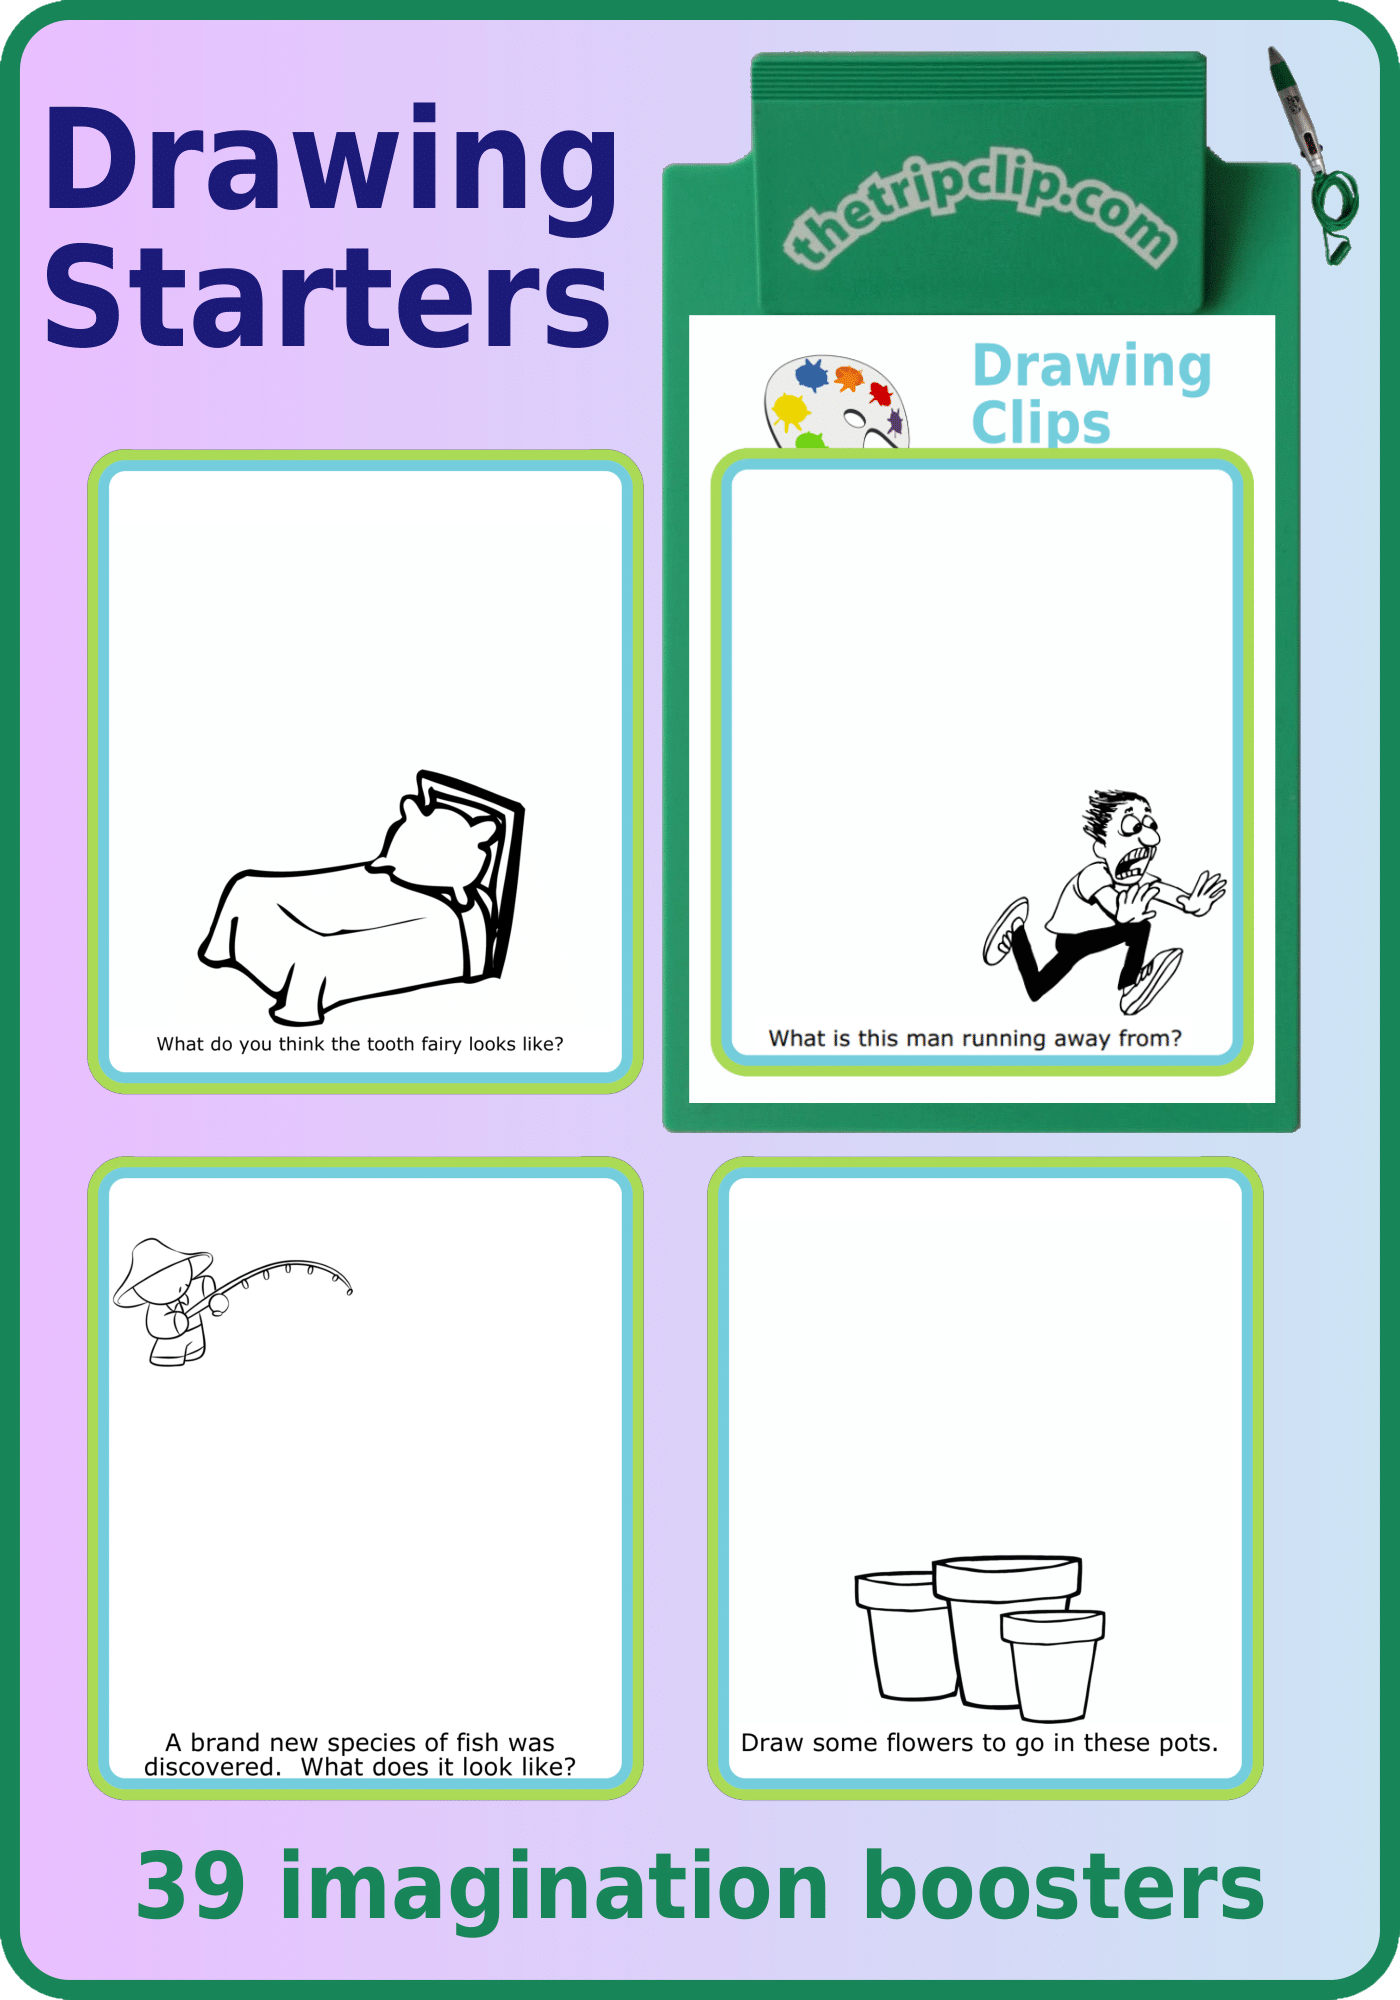 Examples of 4 drawing starters for kids